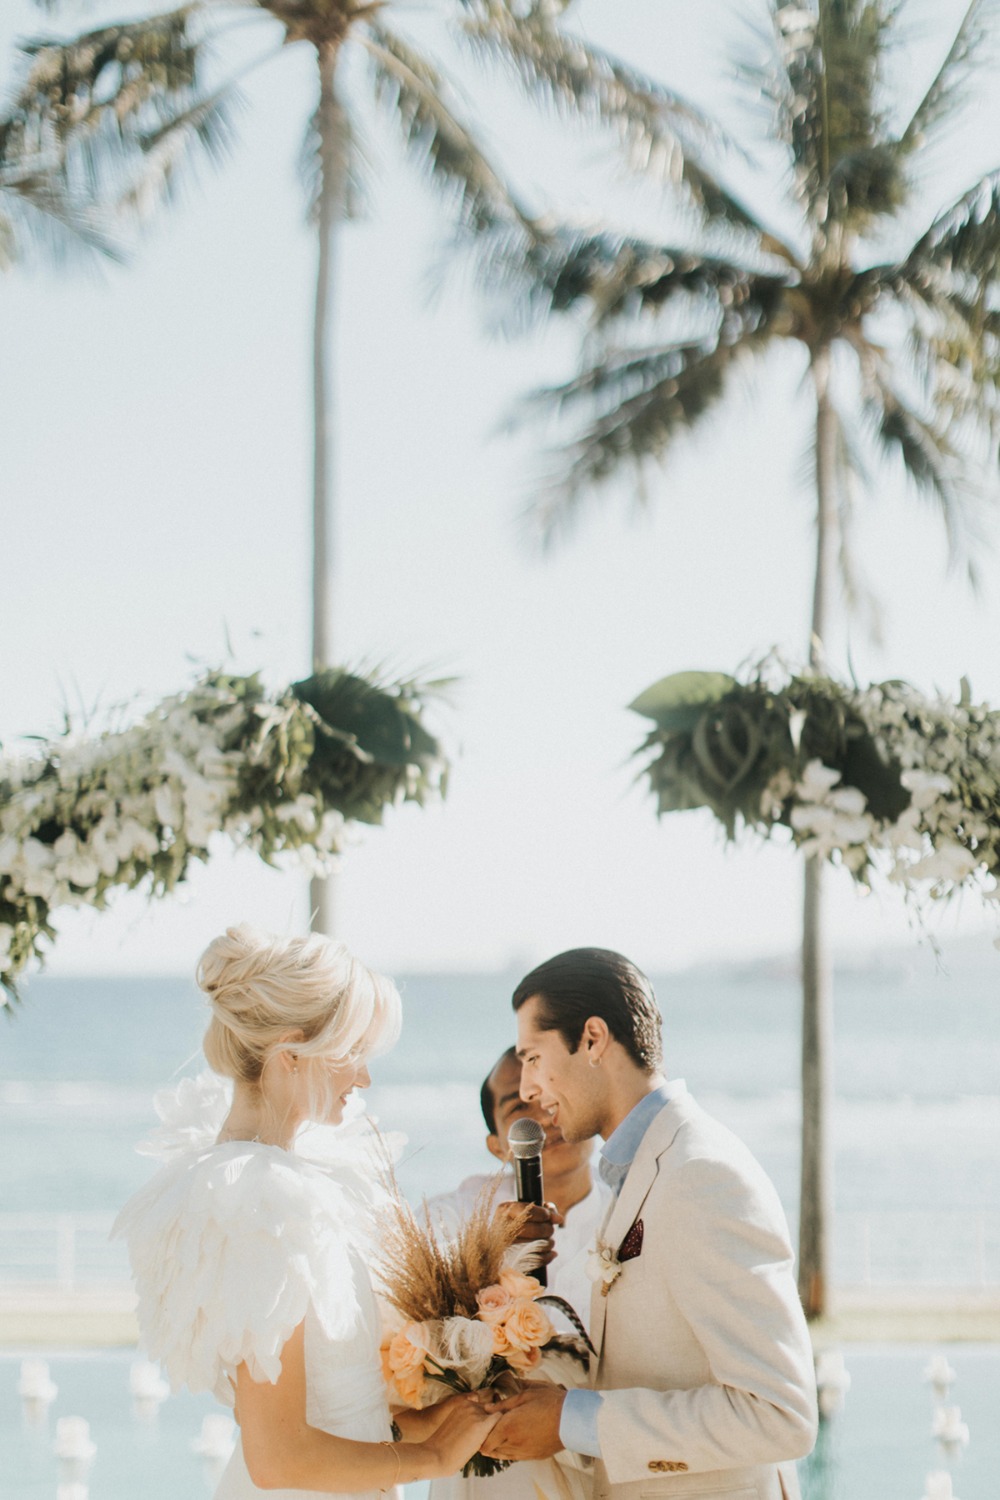 You'll Want To Be This Bride From This Wedding In Bali